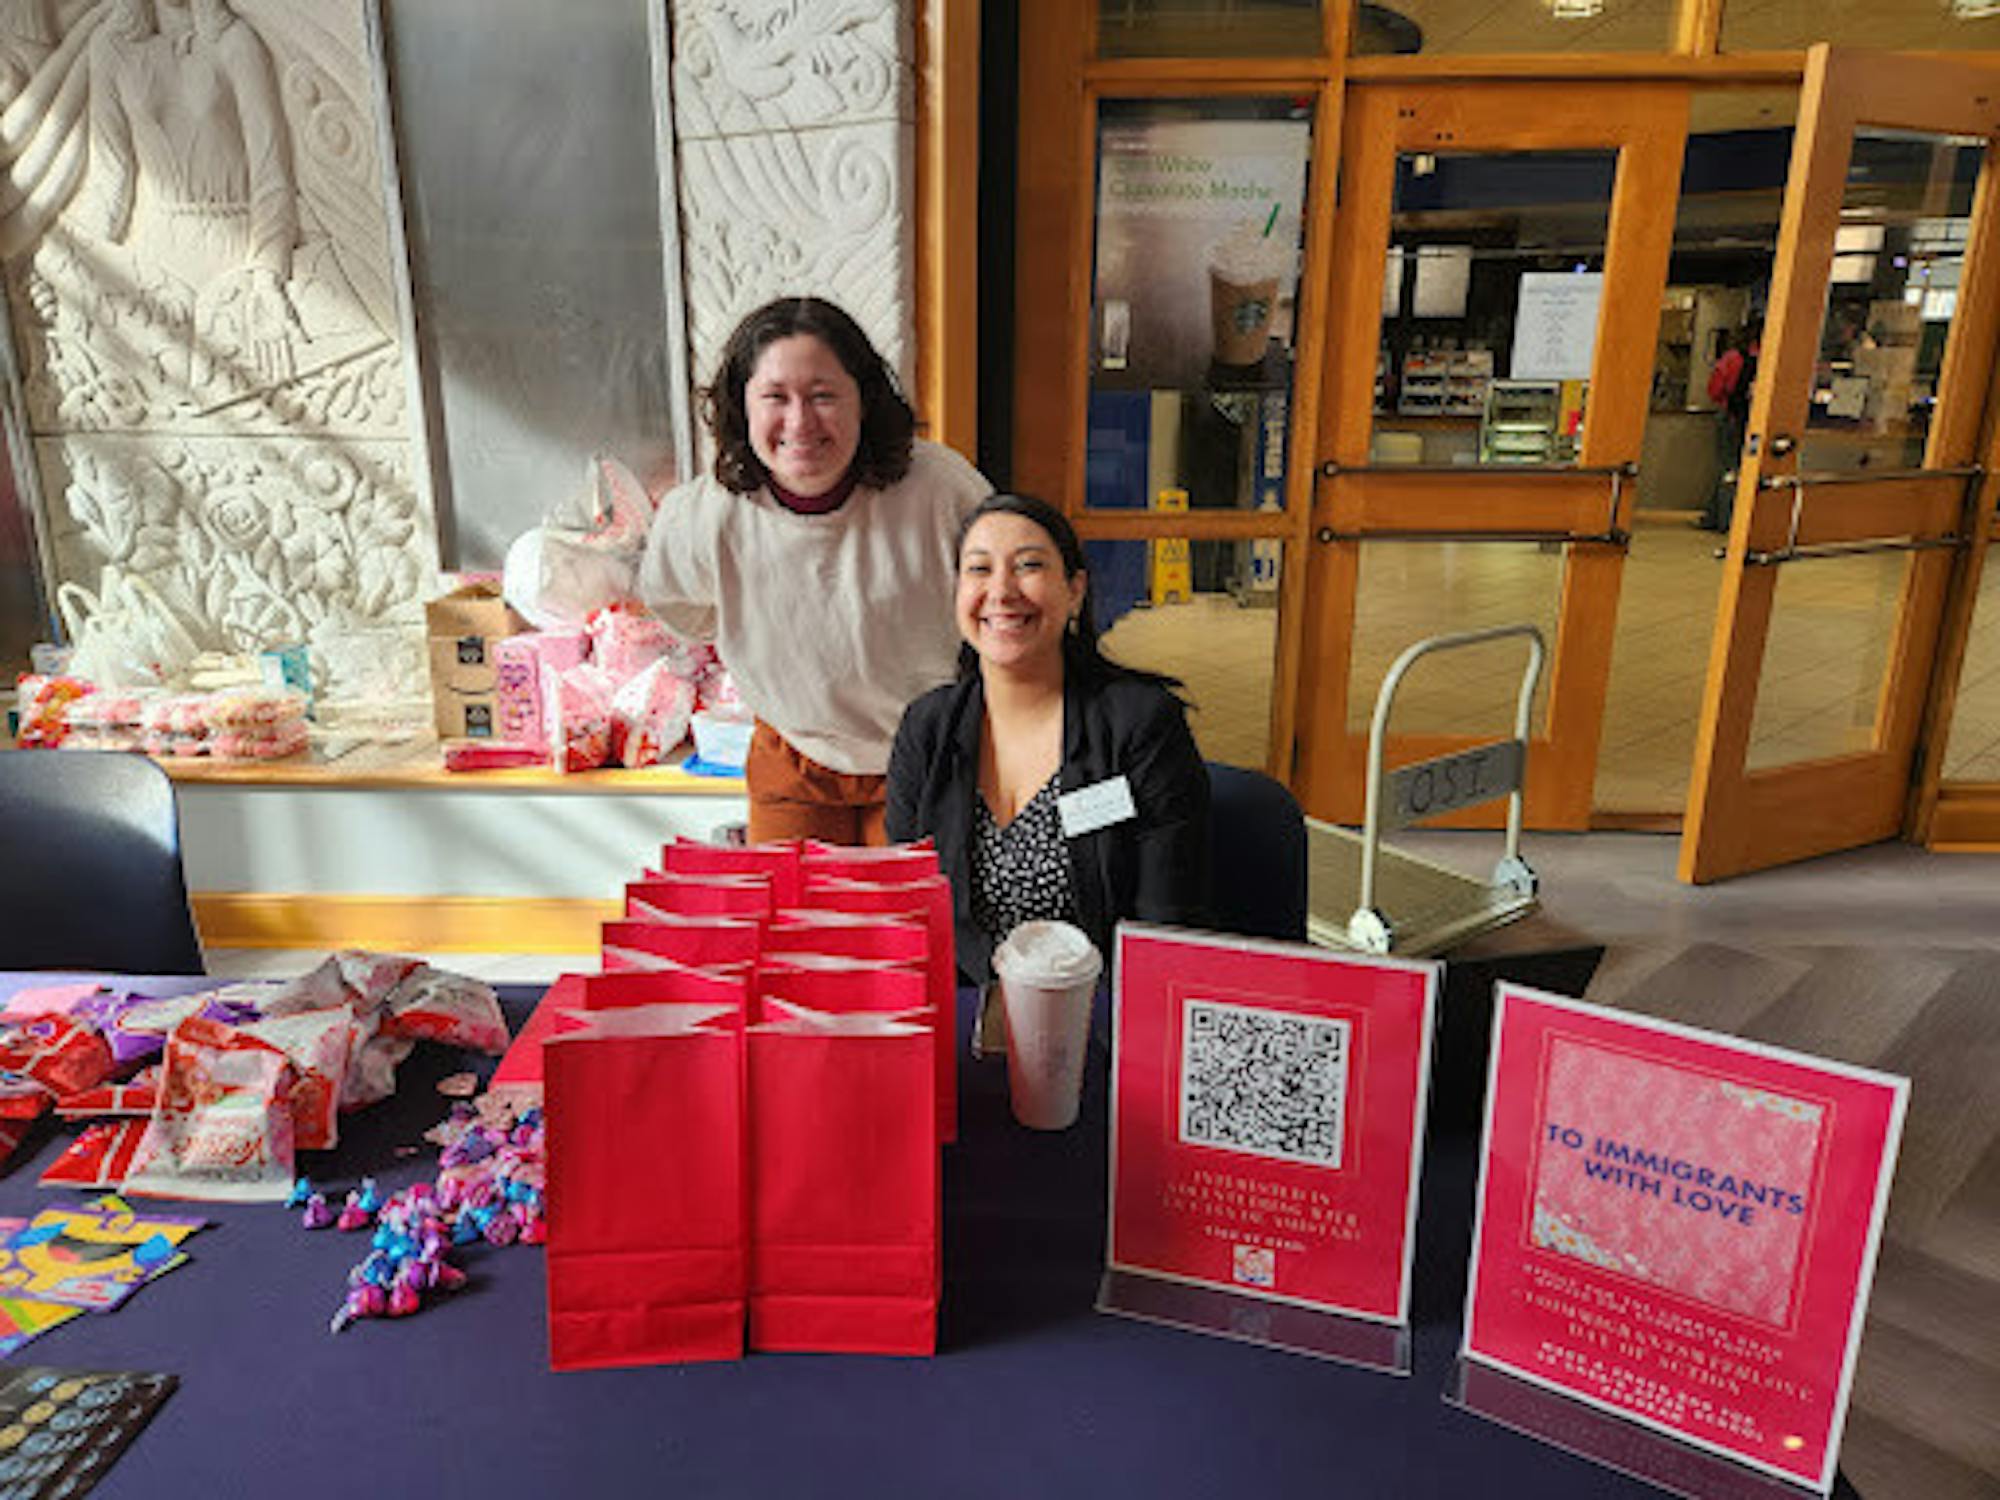 Maria Gonzalez-Diaz and Christin Kloski host an event asking students to stuff snack bags and write messages of encouragement for a local community center.